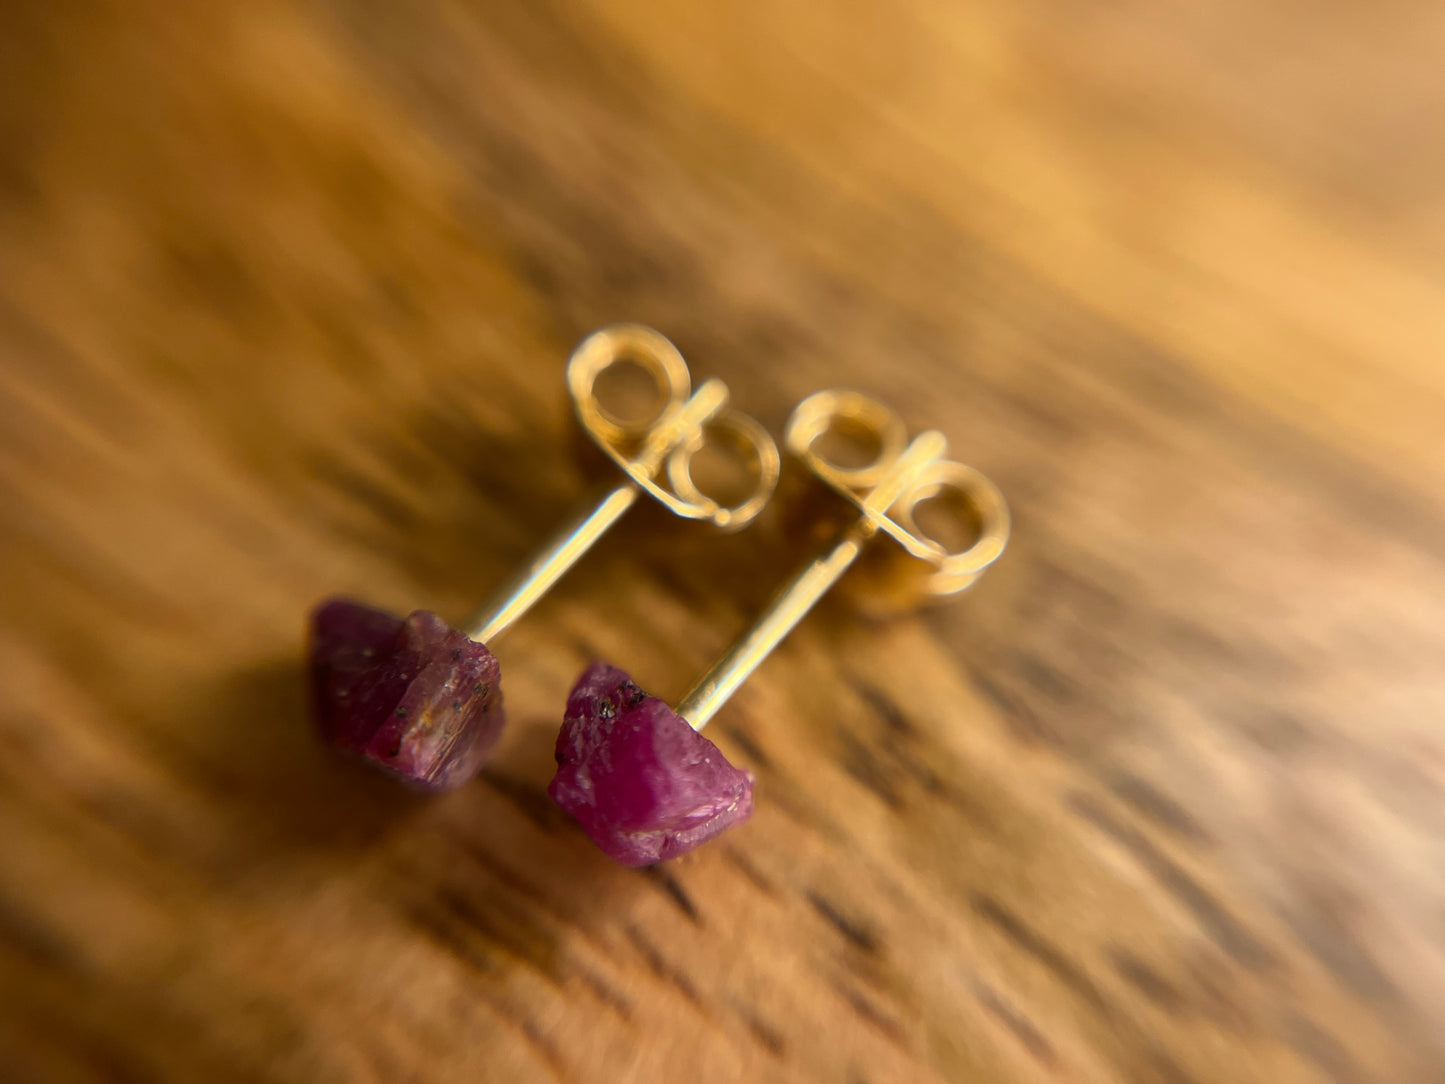 9ct or 18ct Gold Ruby Stud Earrings, Natural Ruby Earrings, Raw Crystal Earrings, Raw Ruby Jewellery, Minimalist Earring Studs